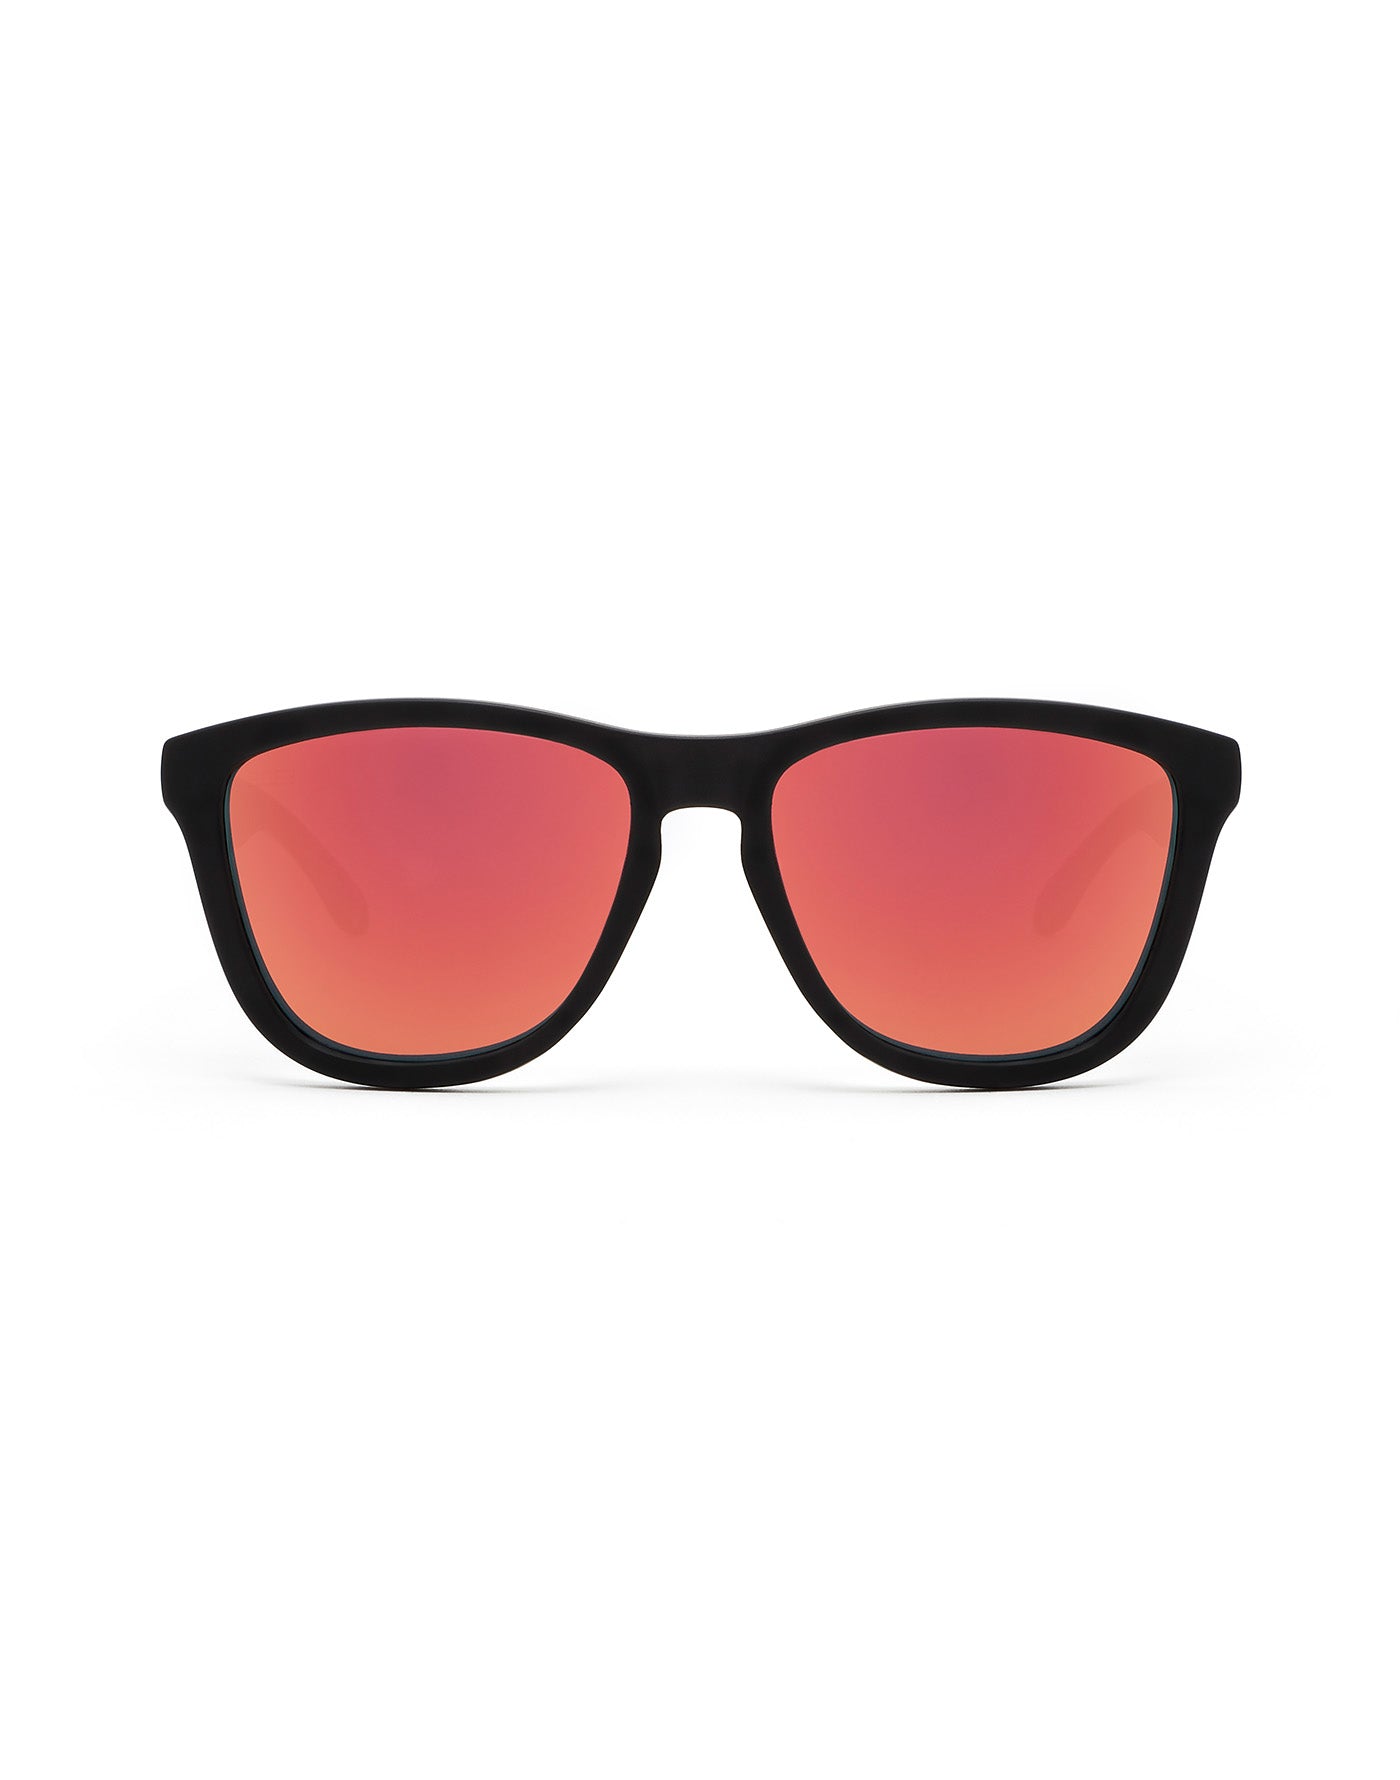 HAWKERS - ONE Carbon Black Ruby For Men and Women UV400